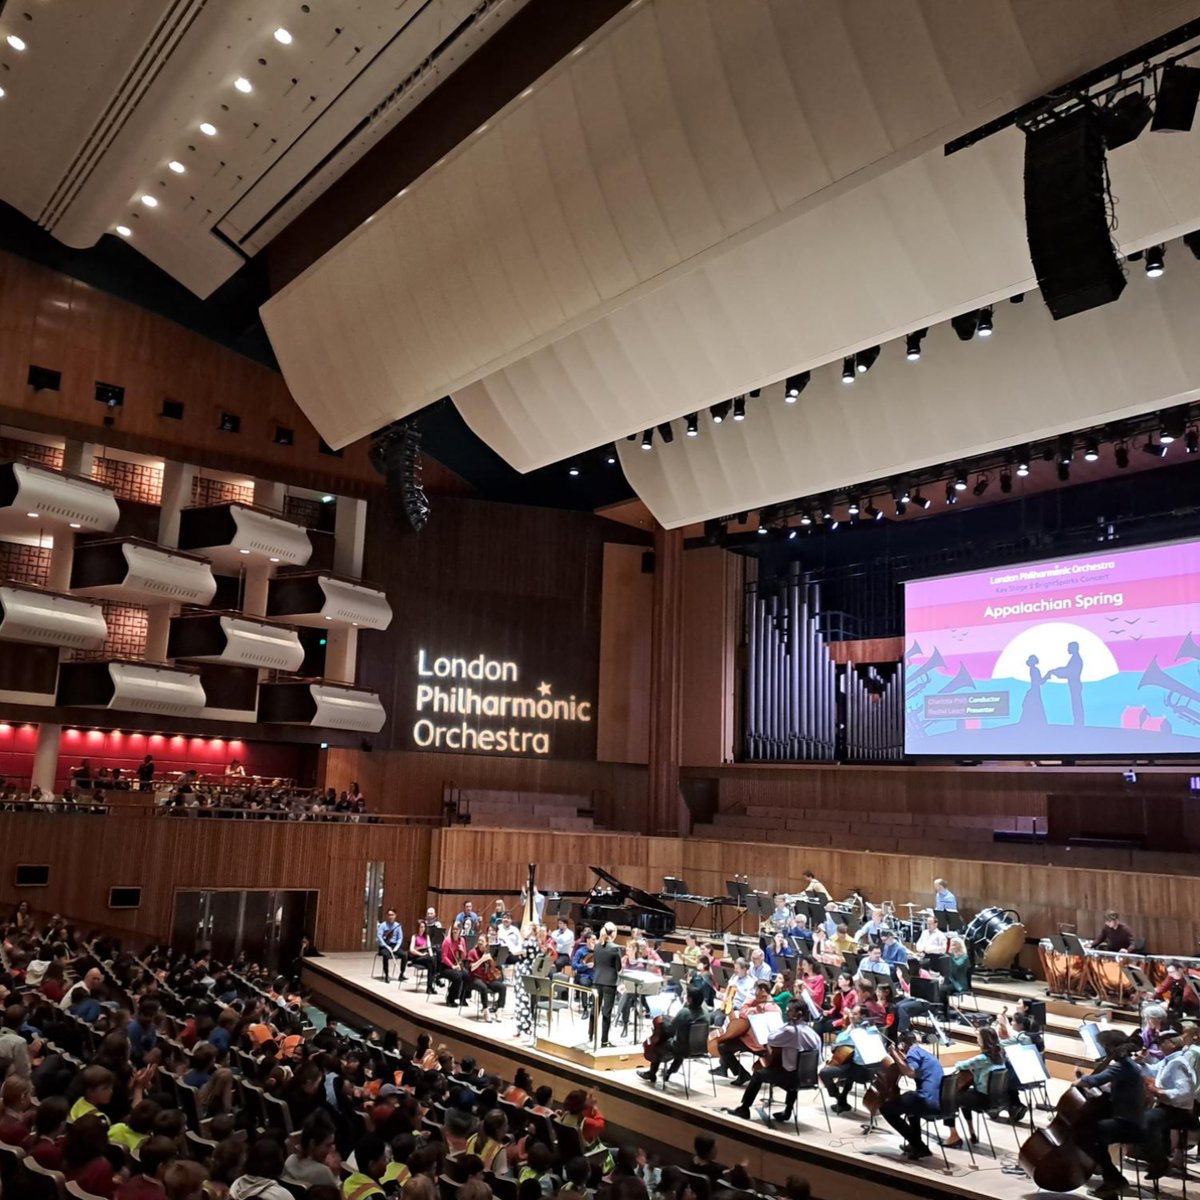 We’ve had the brightest of weeks with glorious sunshine and brilliant BrightSparks 🌞 In London and Eastbourne, we’ve been joined by hundreds of Key Stage 2 children and their teachers for a journey of America-inspired music in our BrightSparks concerts. We had so much fun! 🎉